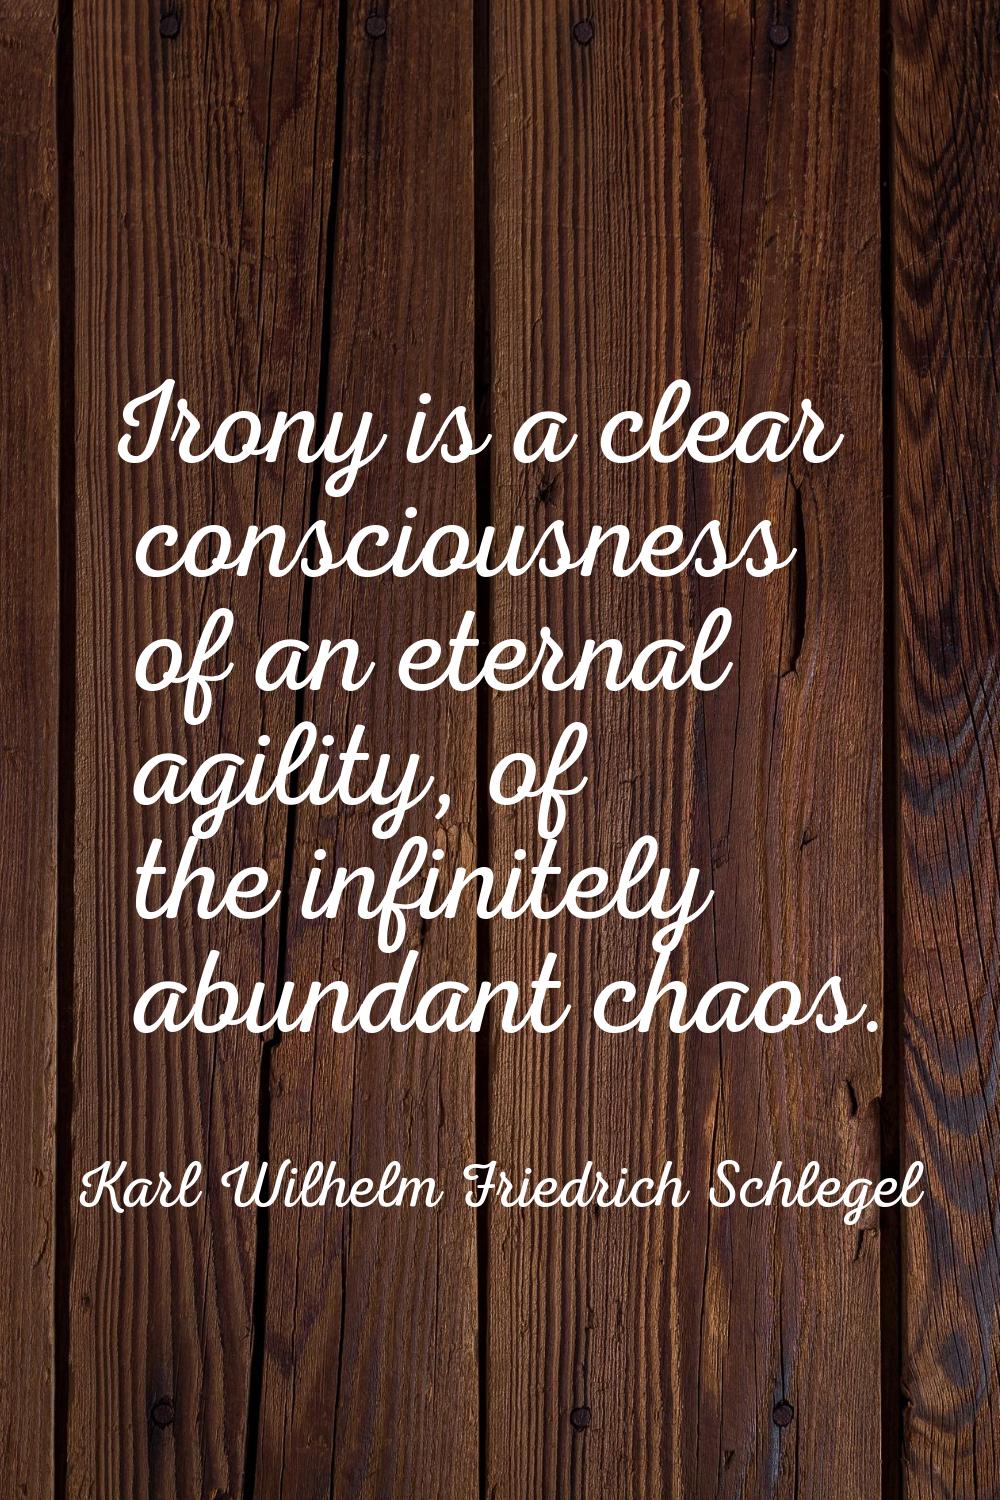 Irony is a clear consciousness of an eternal agility, of the infinitely abundant chaos.